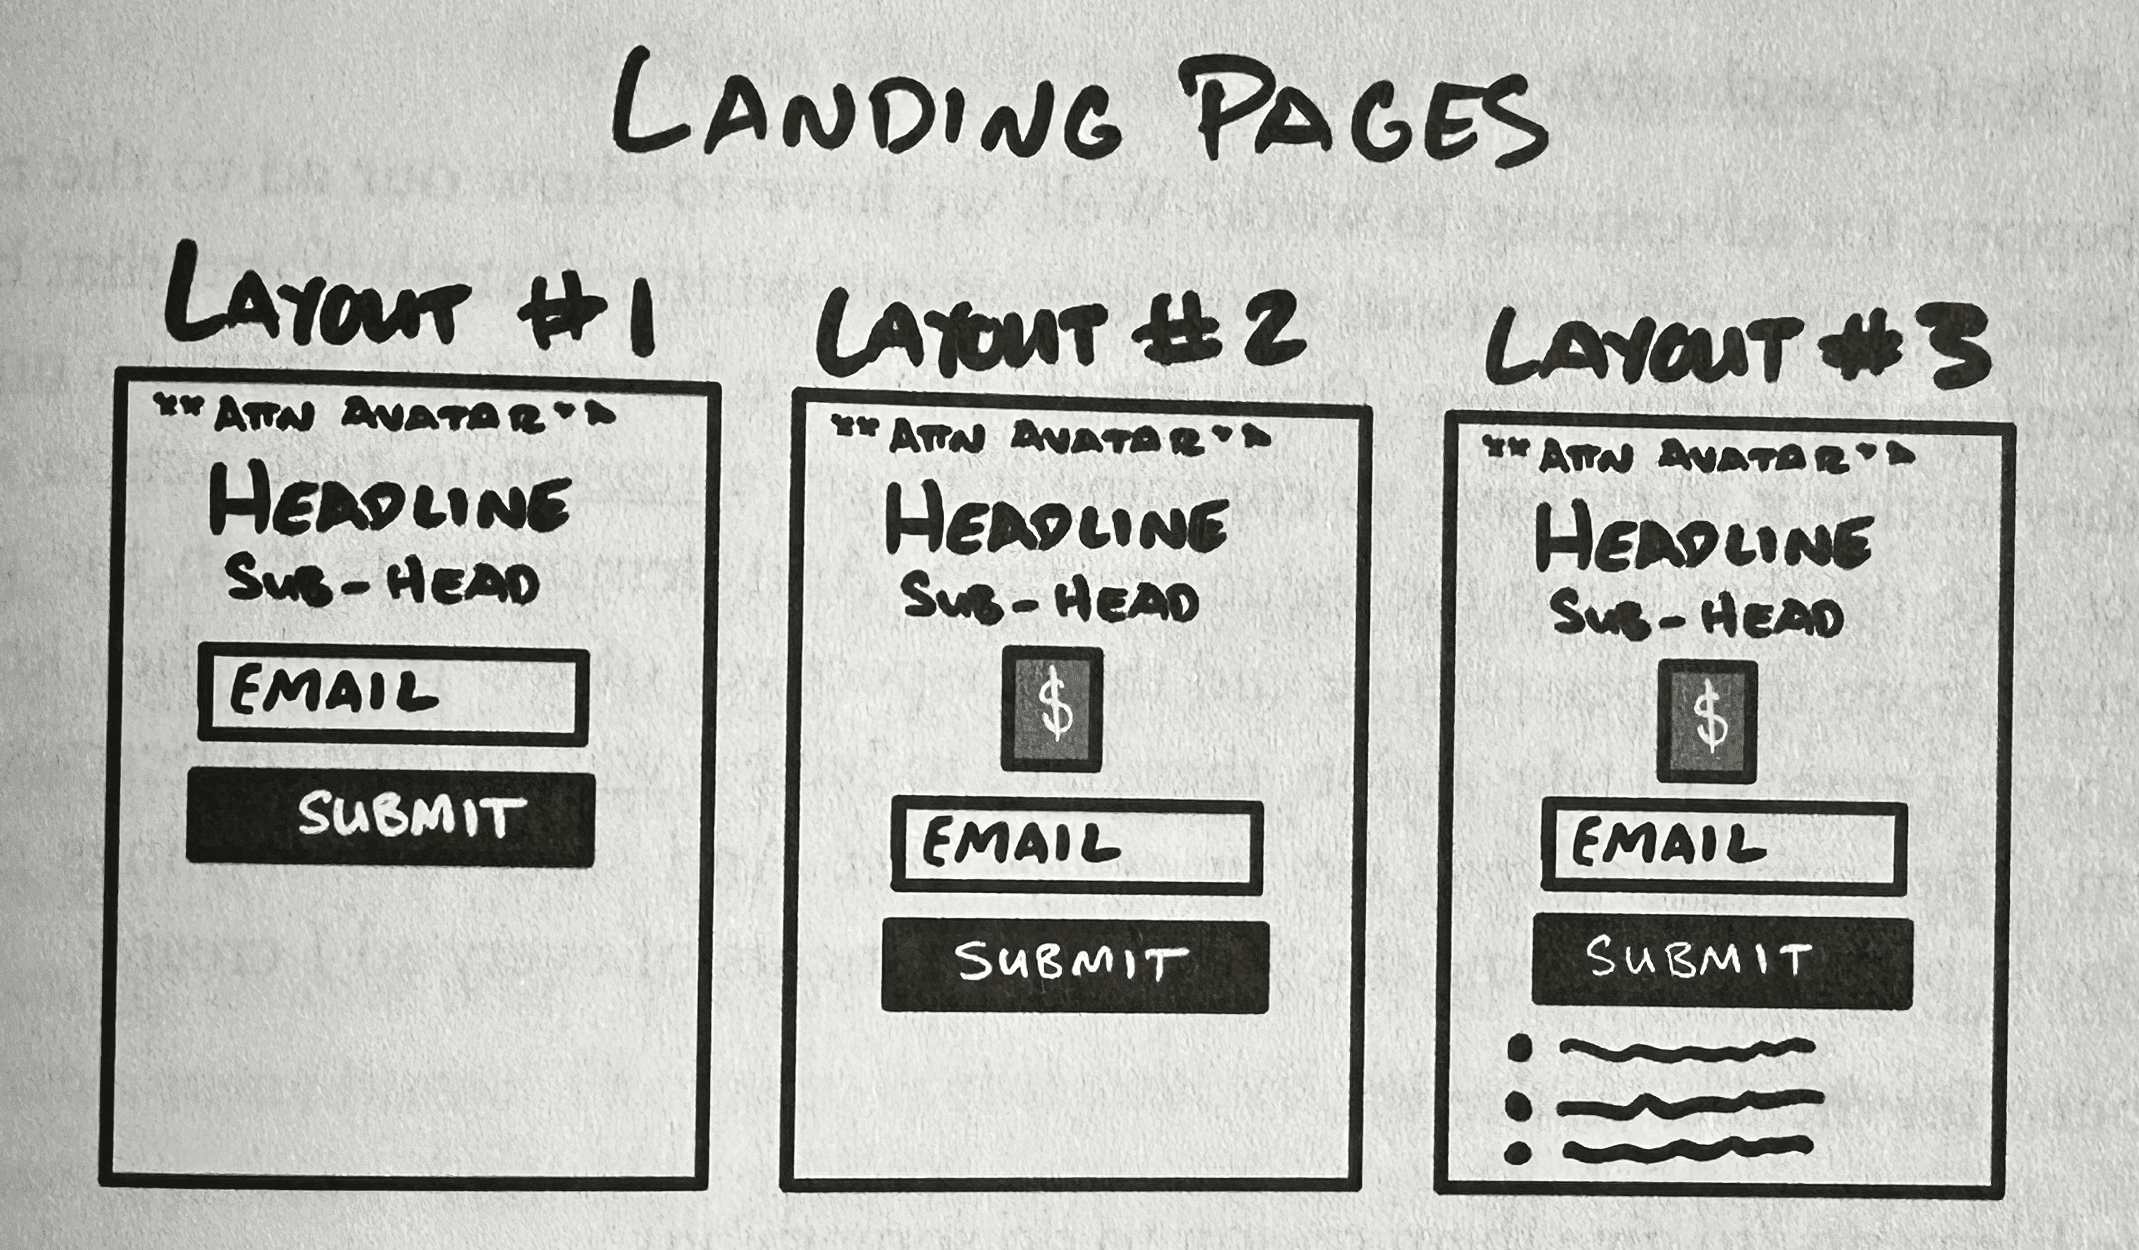 Examples of Landing Page formats from $100M Leads by Alex Hormozi